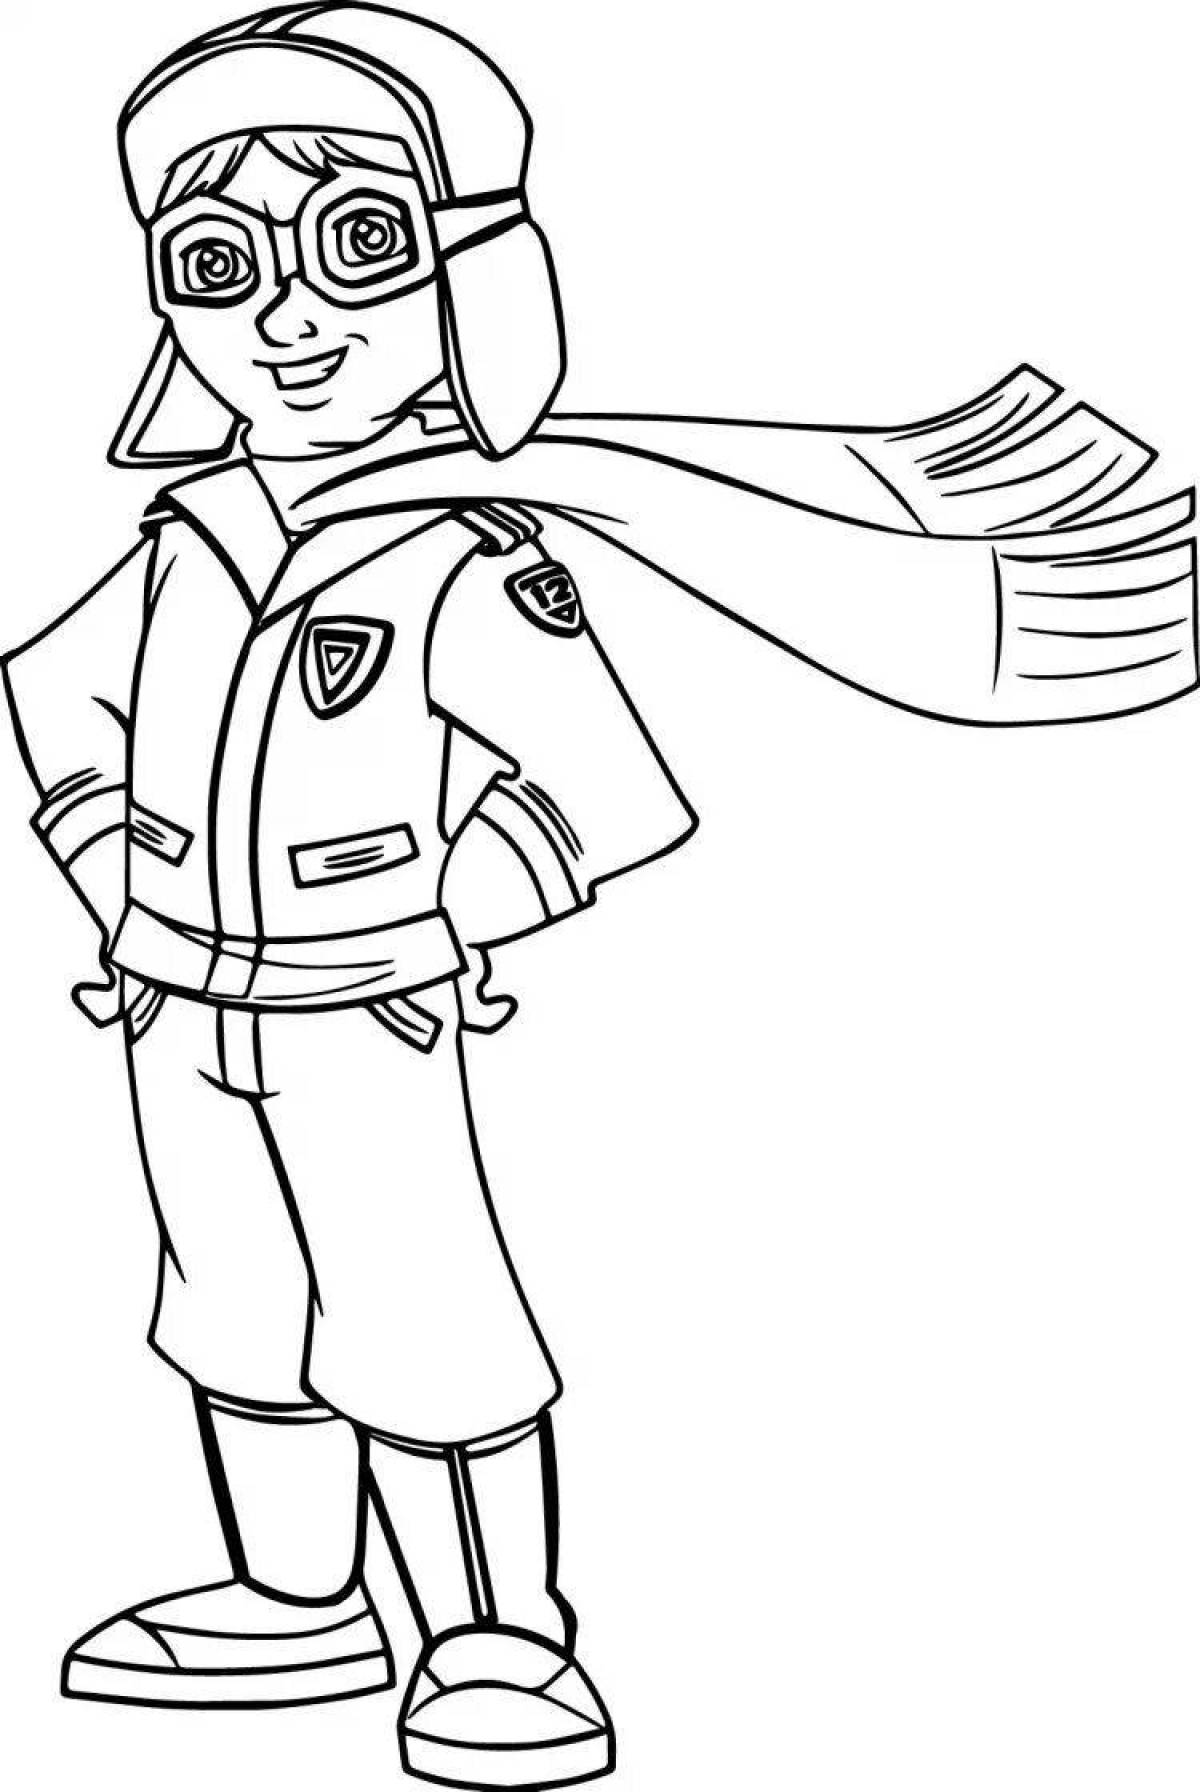 Fearless pilot coloring page